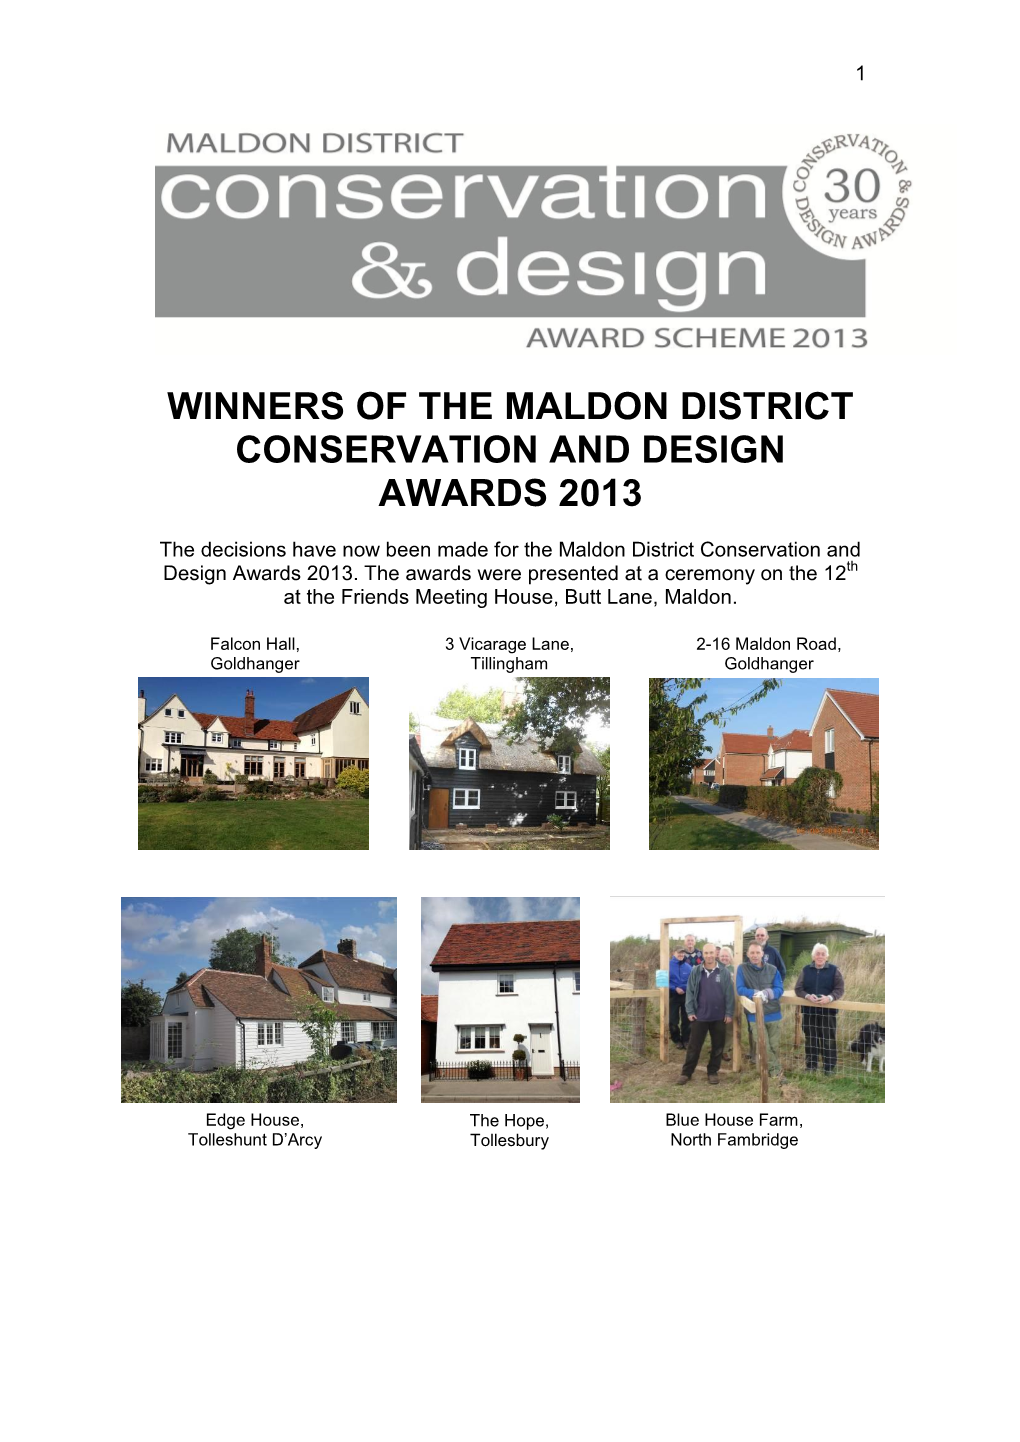 Winners of the Maldon District Conservation and Design Awards 2013